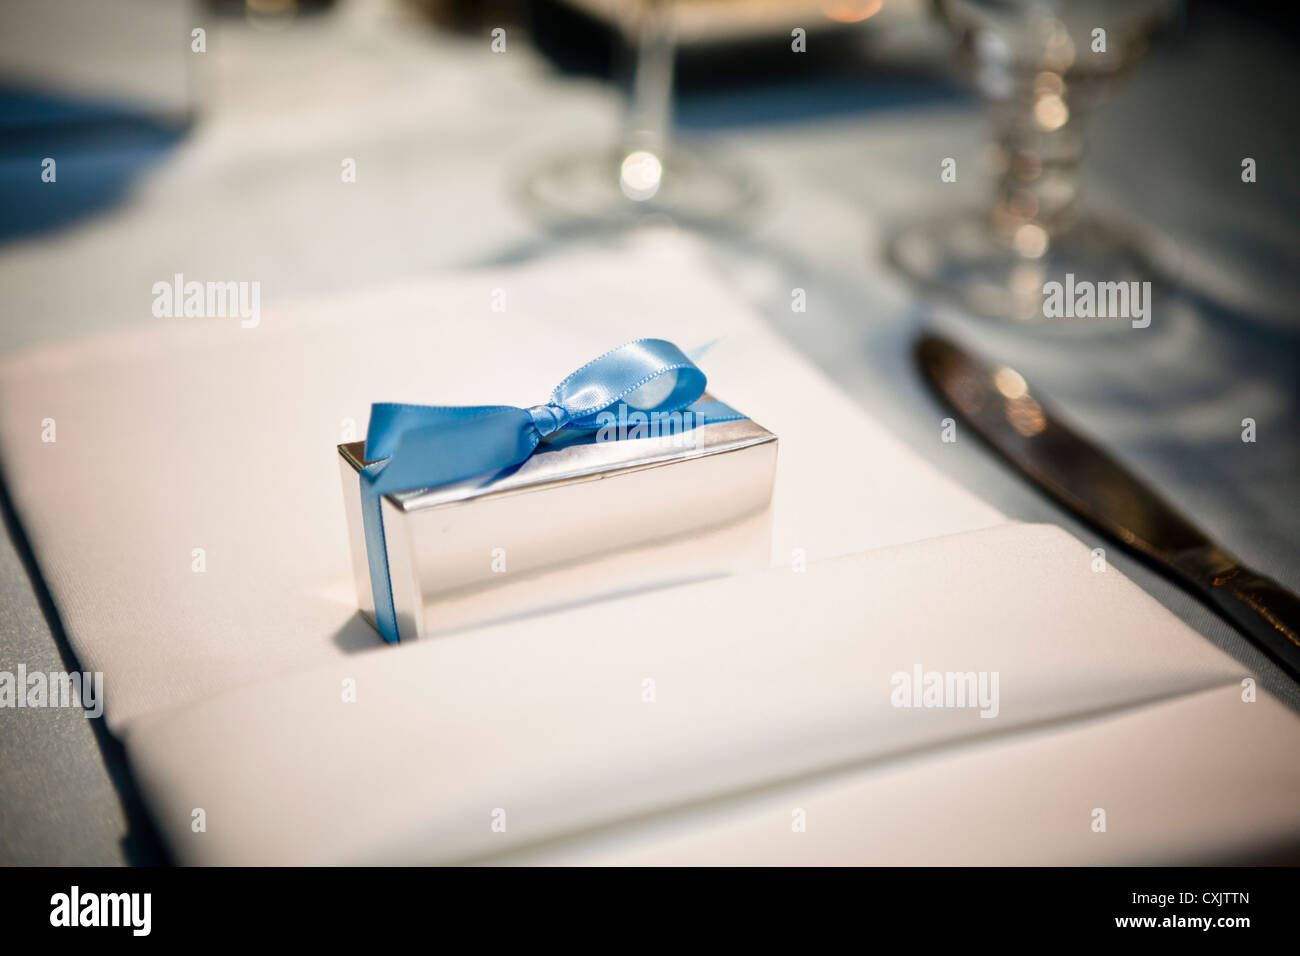 Wedding Favor at Place Setting Stock Photo